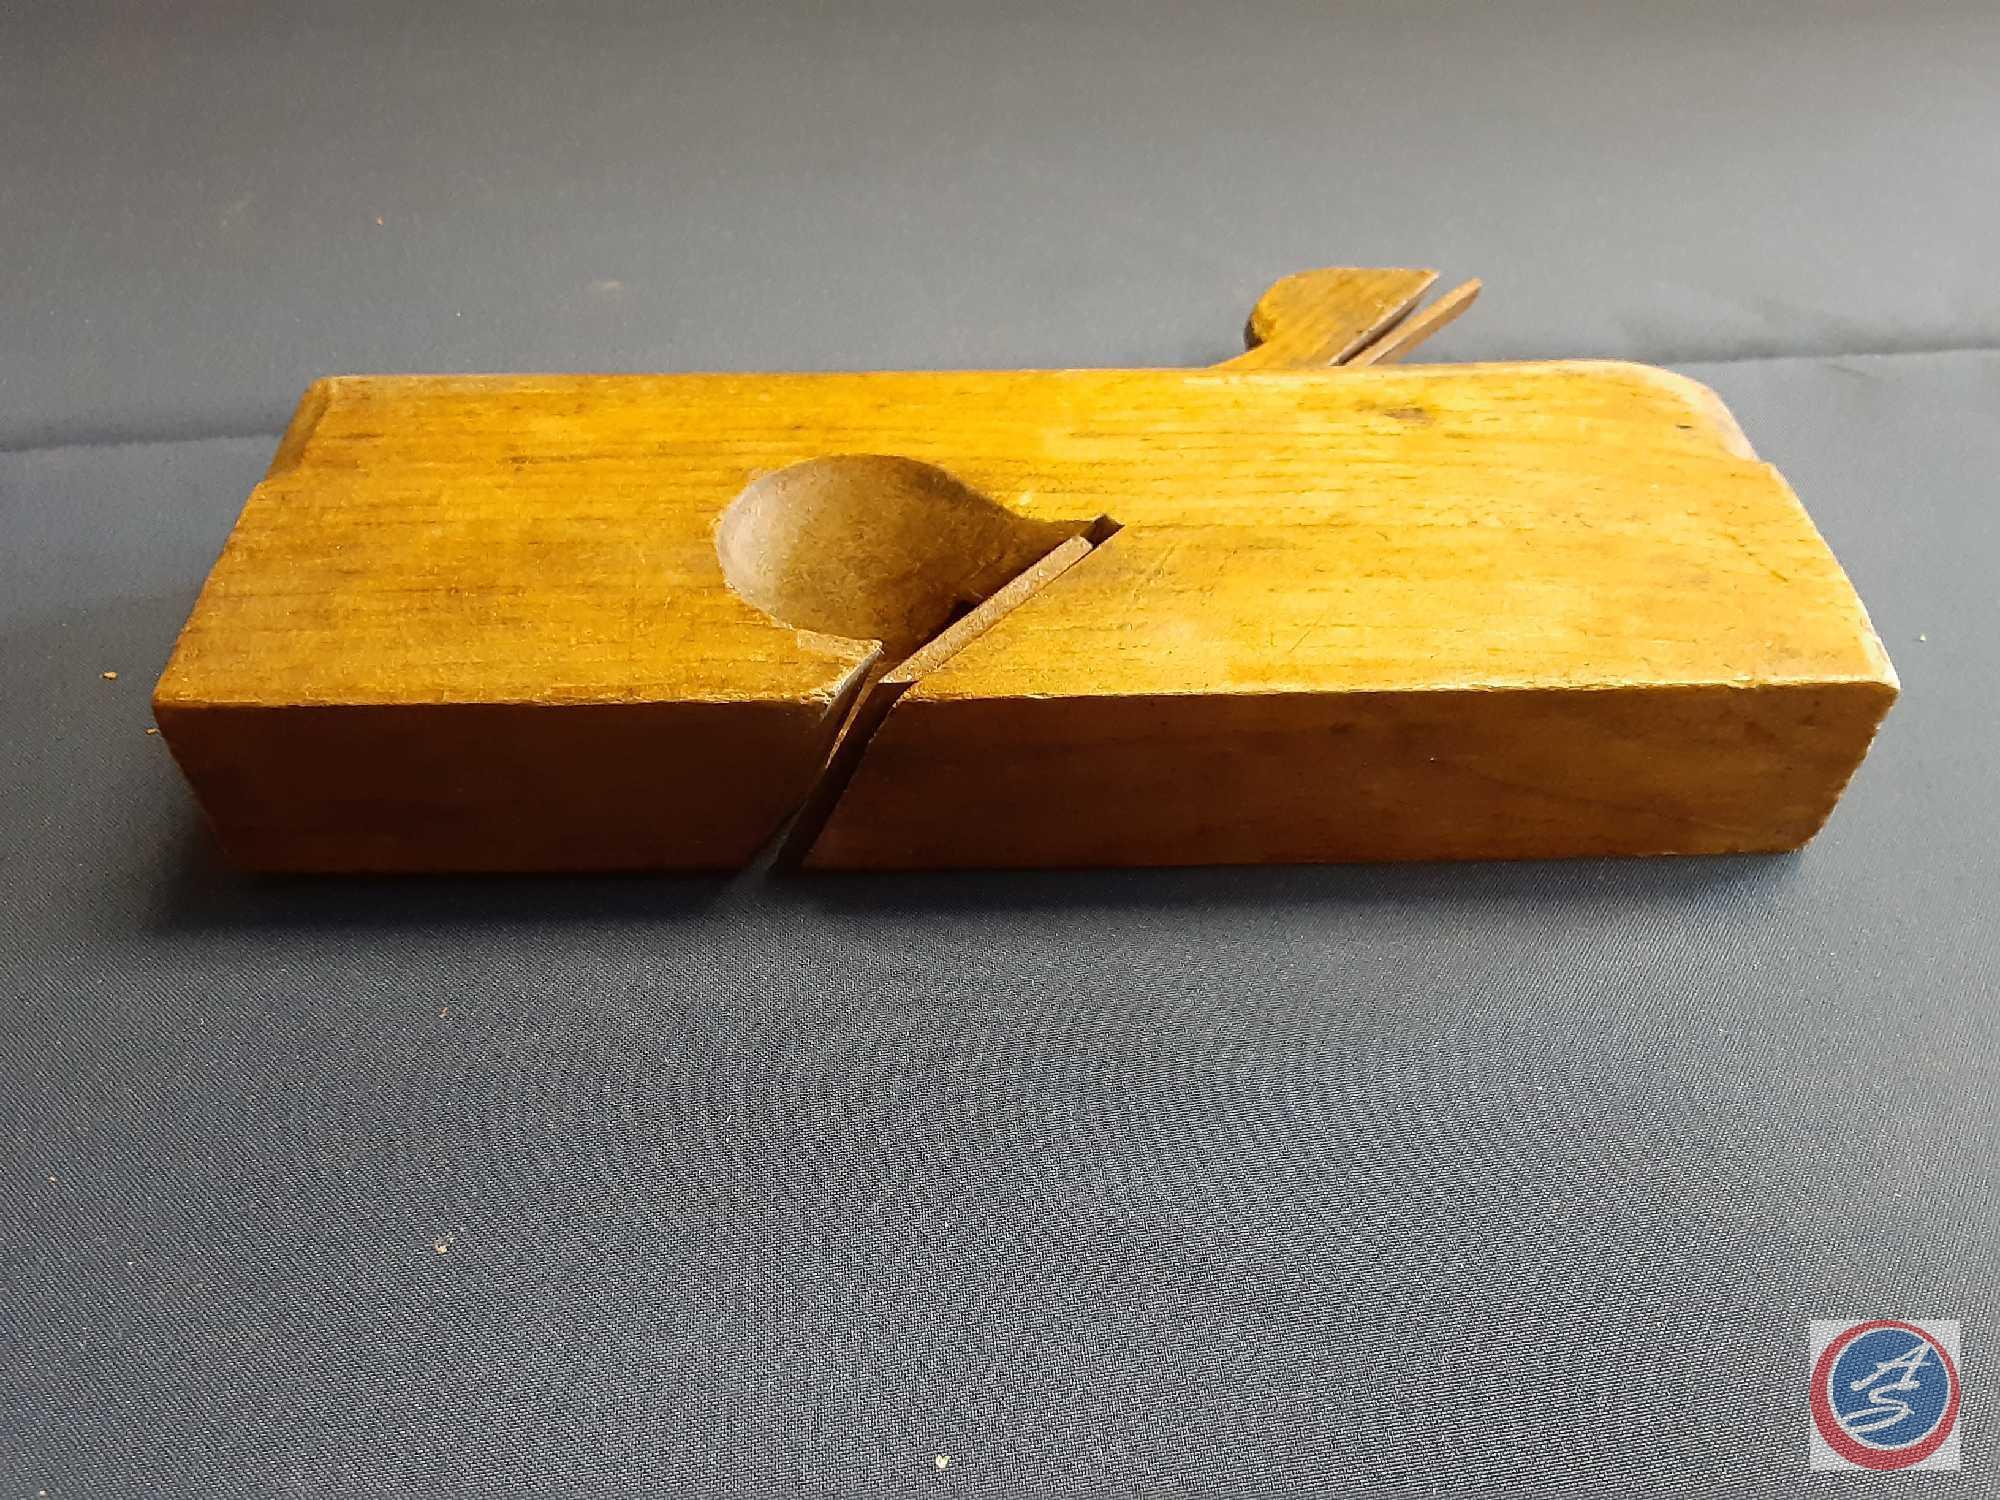 (4) Antique wood planes : (1) M.N.F D For Sears, Roebuck & Co. Chicago, 25th (9), J Smith and Co.R